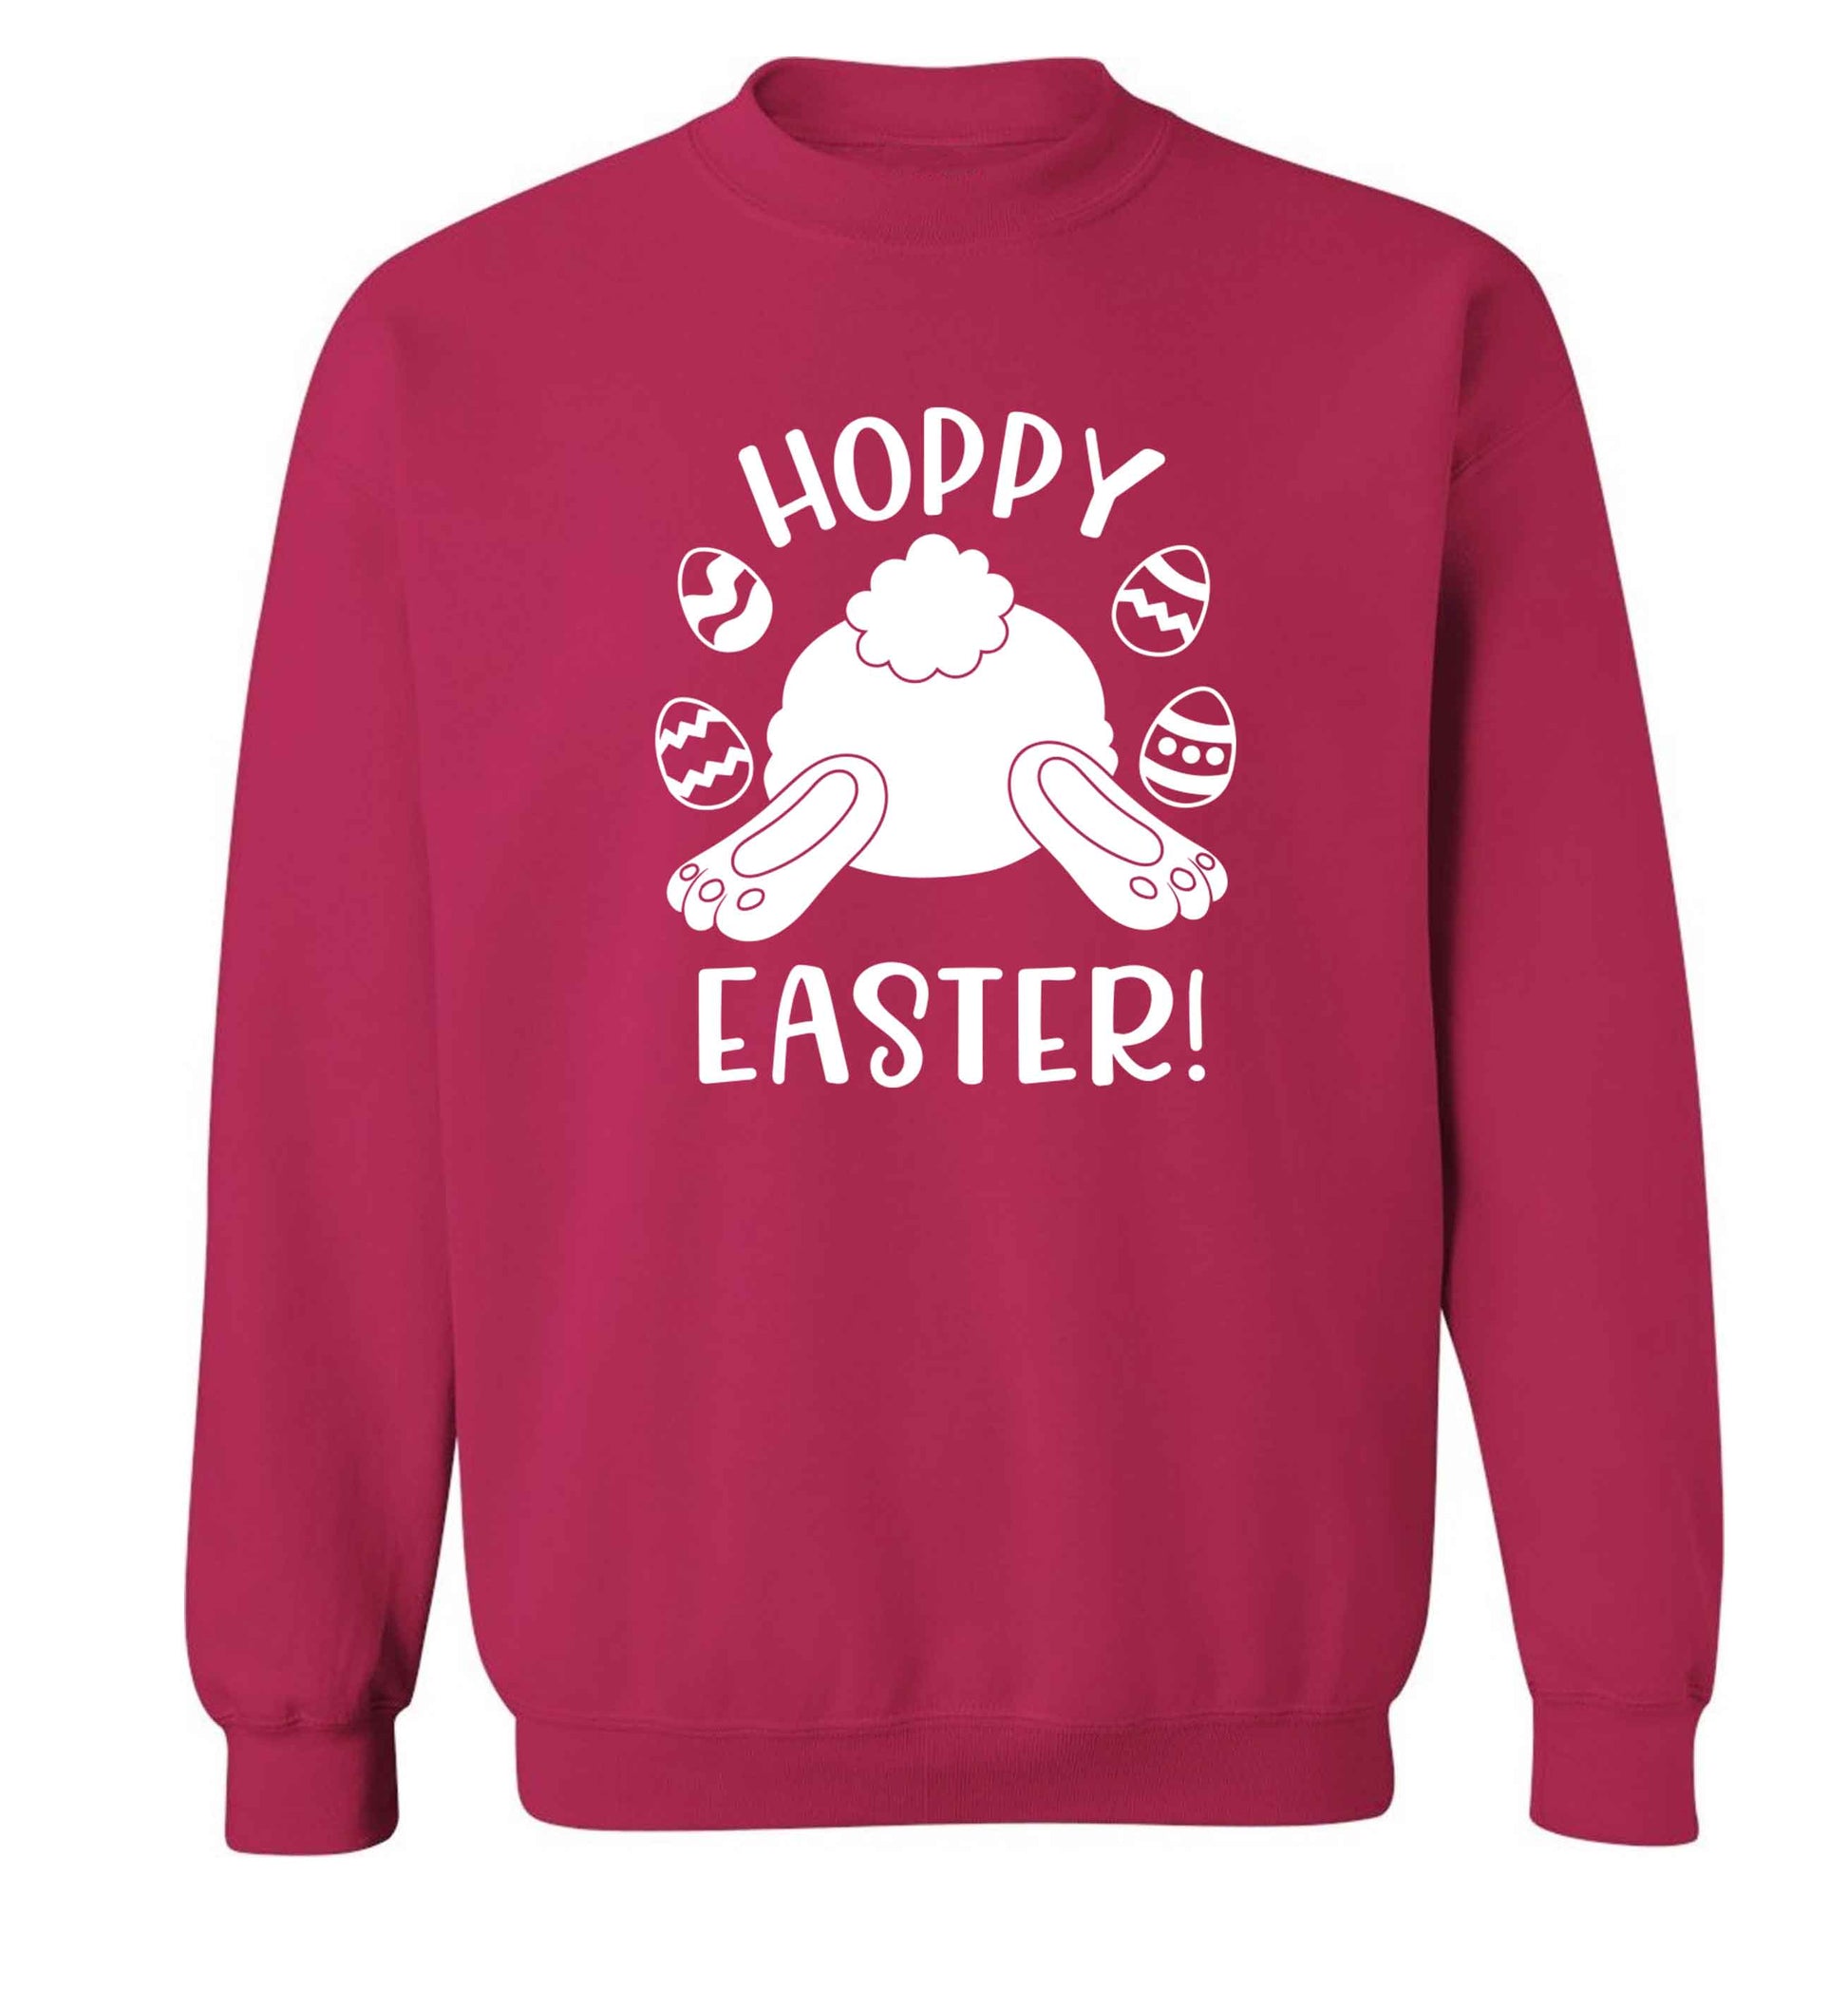 Hoppy Easter adult's unisex pink sweater 2XL